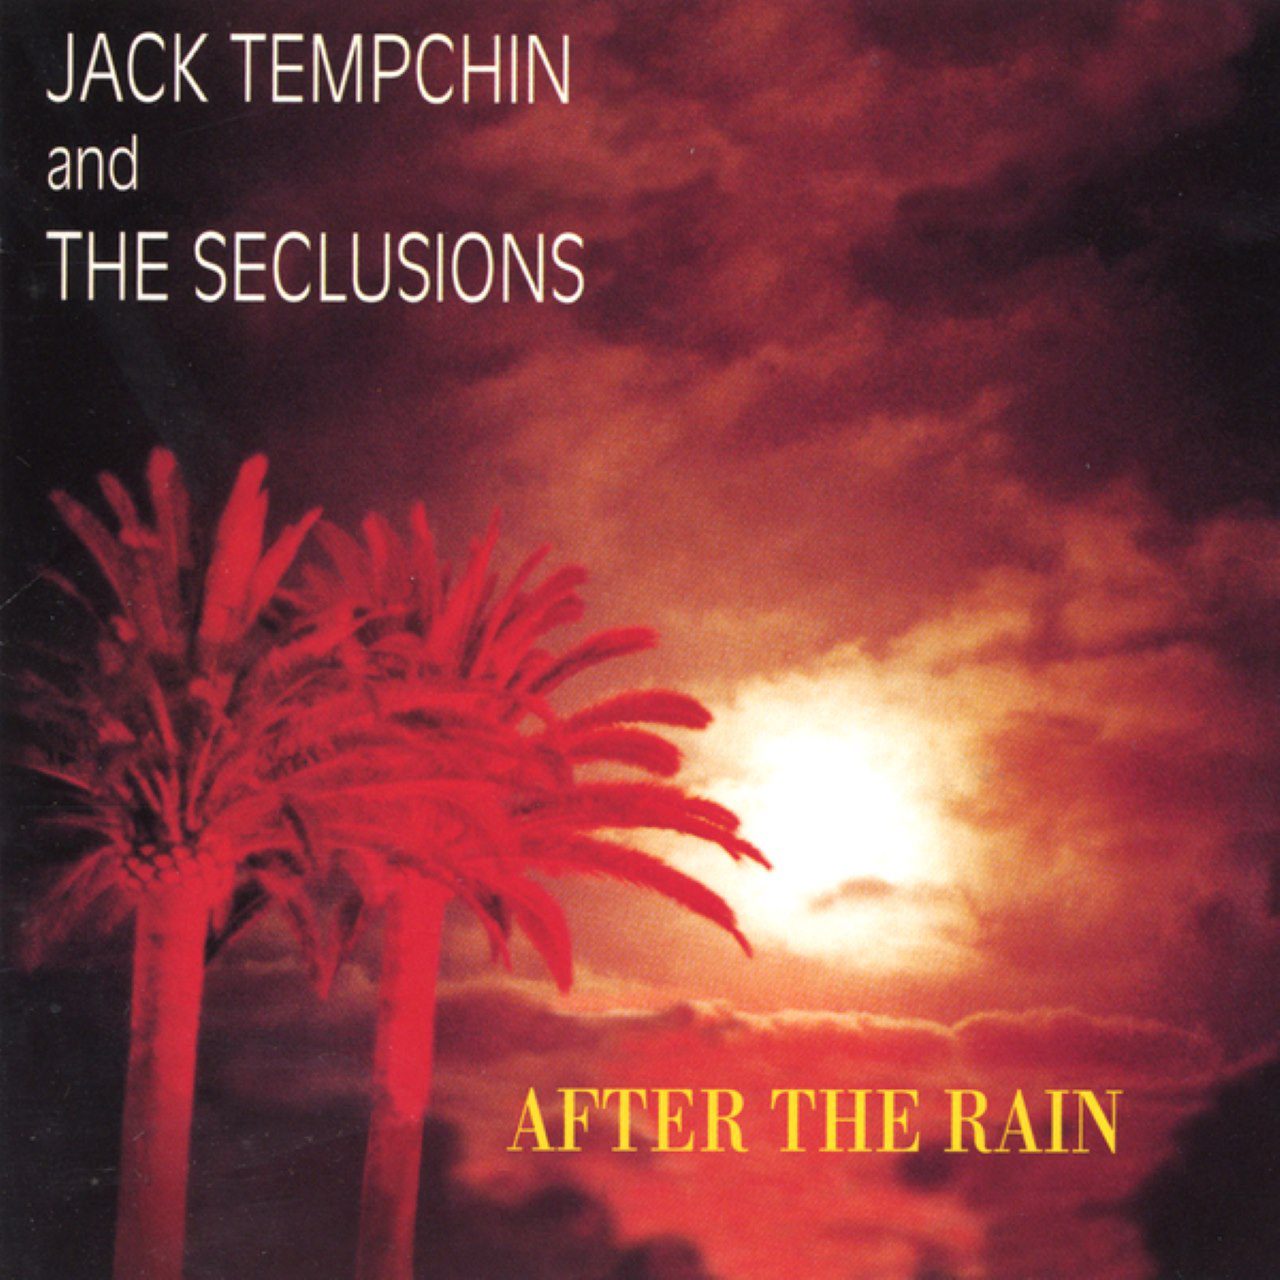 Jack Tempchin & The Seclusions – After The Rain cover album